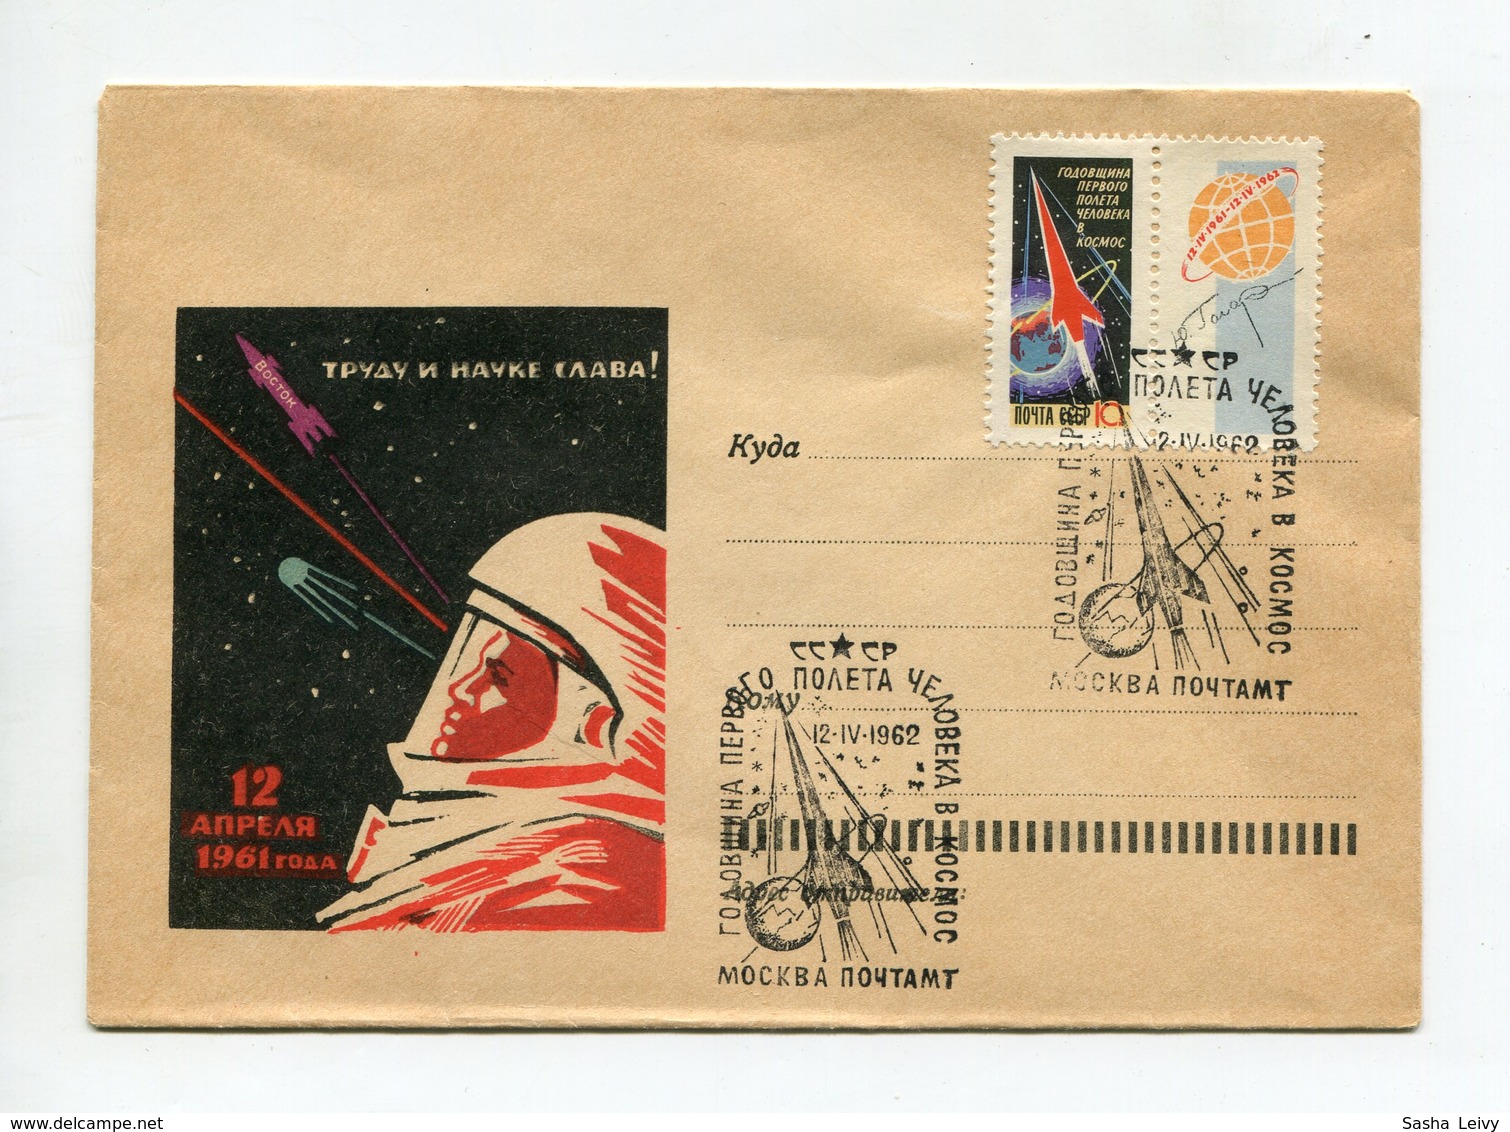 SPACE COVER USSR 1962 GLORY TO LABOR AND SCIENCE 12 APRIL 1961 SP. POSTMARK ANNIVERSARY OF FIRST HUMAN FLIGHT TO SPACE - UdSSR